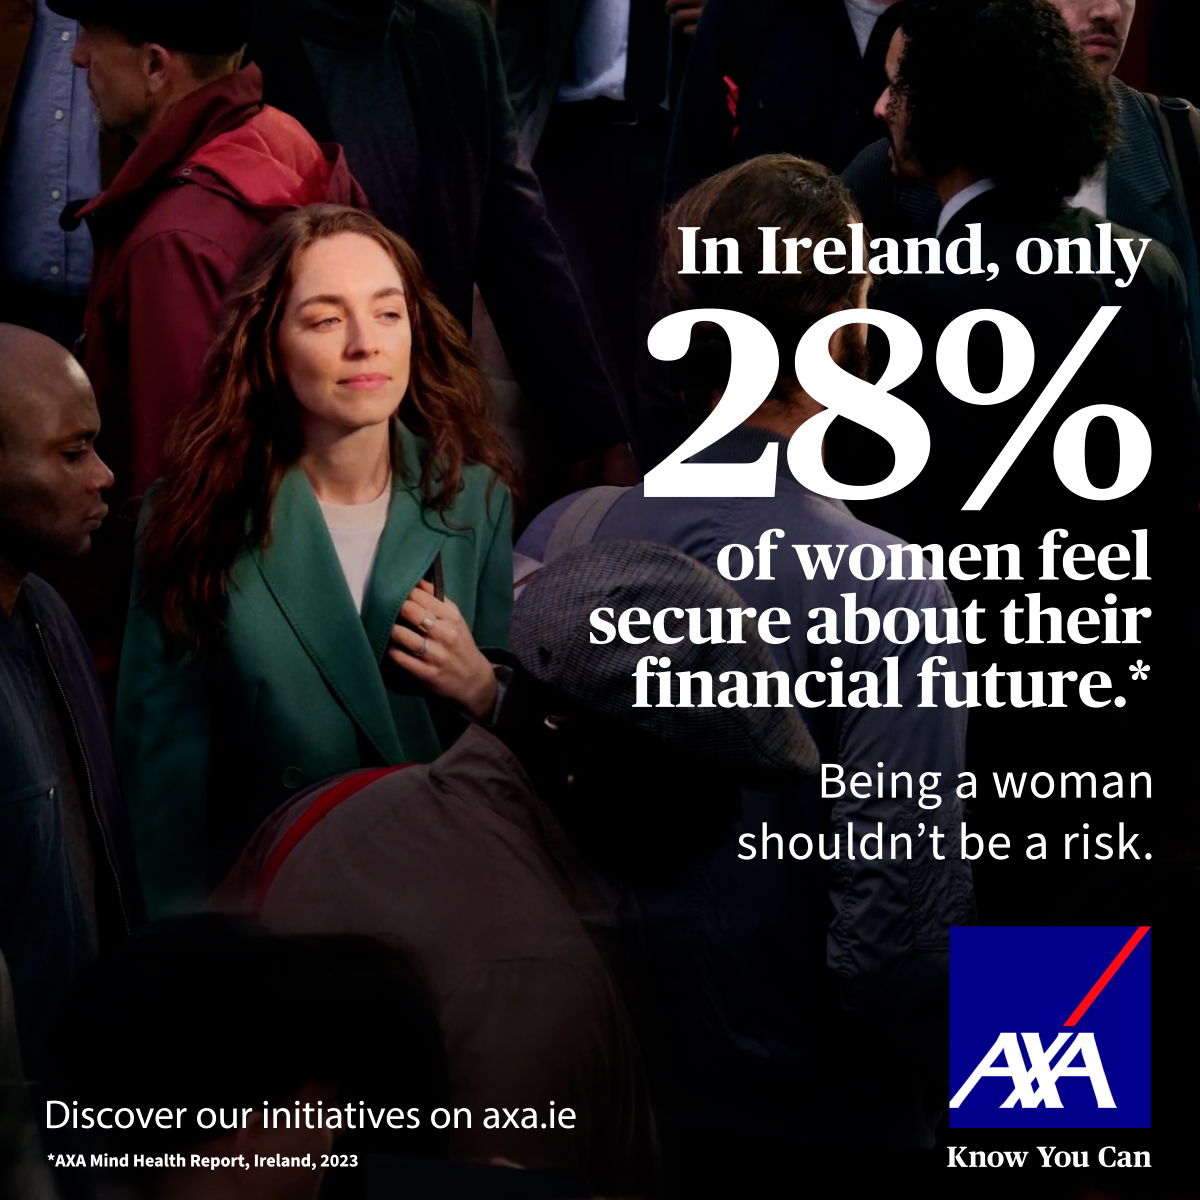 In Ireland, only 28% of women feel secure in their financial future. Being a woman shouldn't be a risk That's why AXA is involved in initiatives to help women's professional and economic empowerment. Discover our global and local initiatives. axa.ie